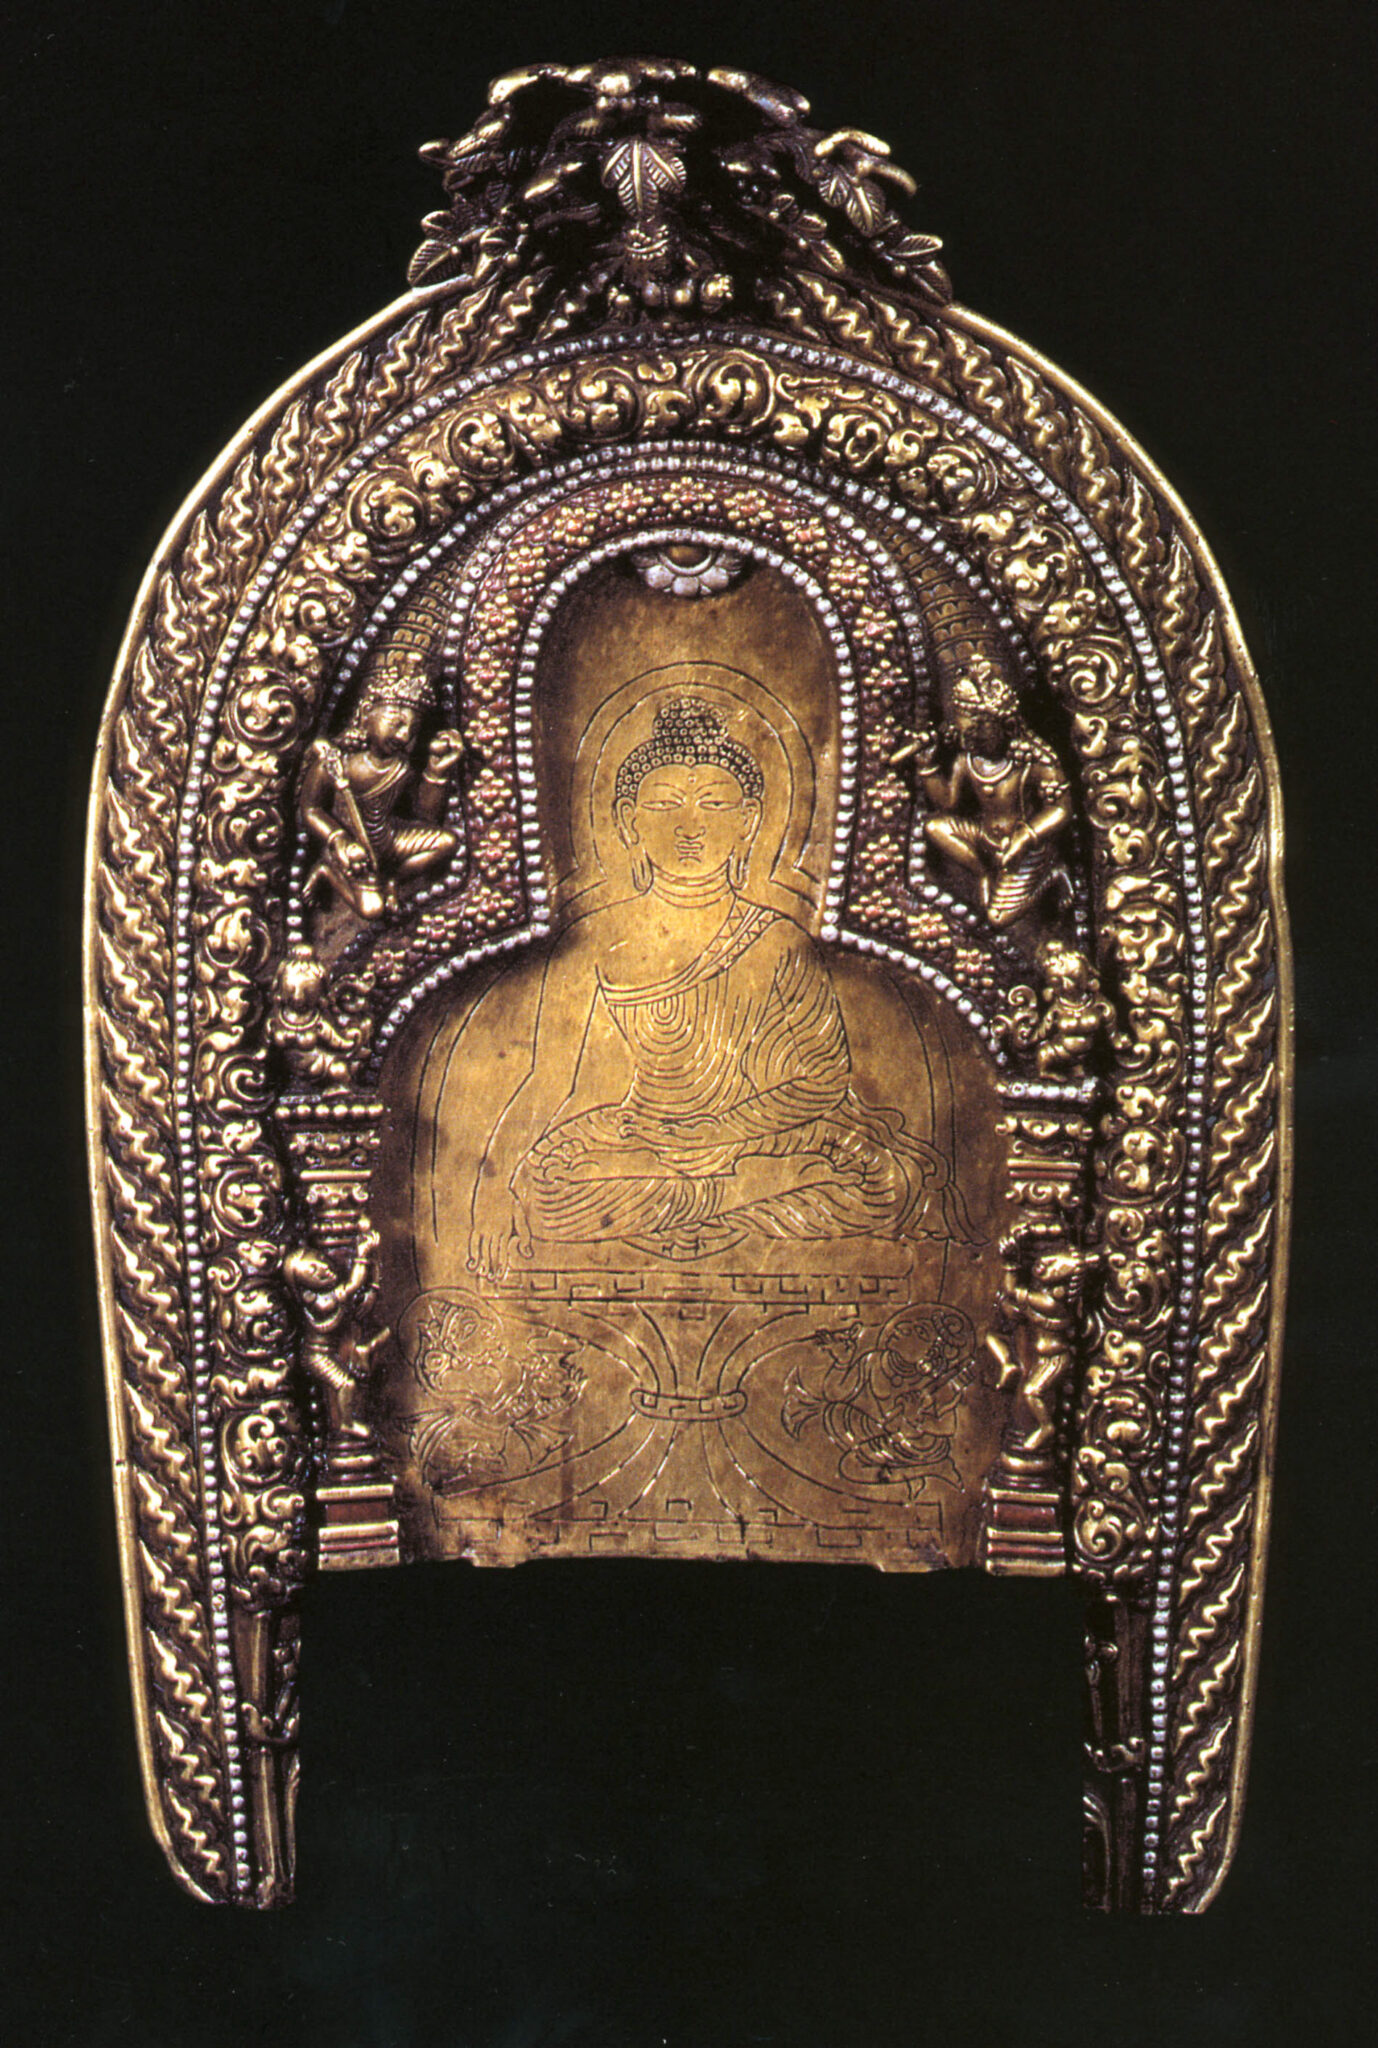 Brasswork featuring etched image of seated Buddha enclosed by arched structure and two patterned, horseshoe-shaped bands